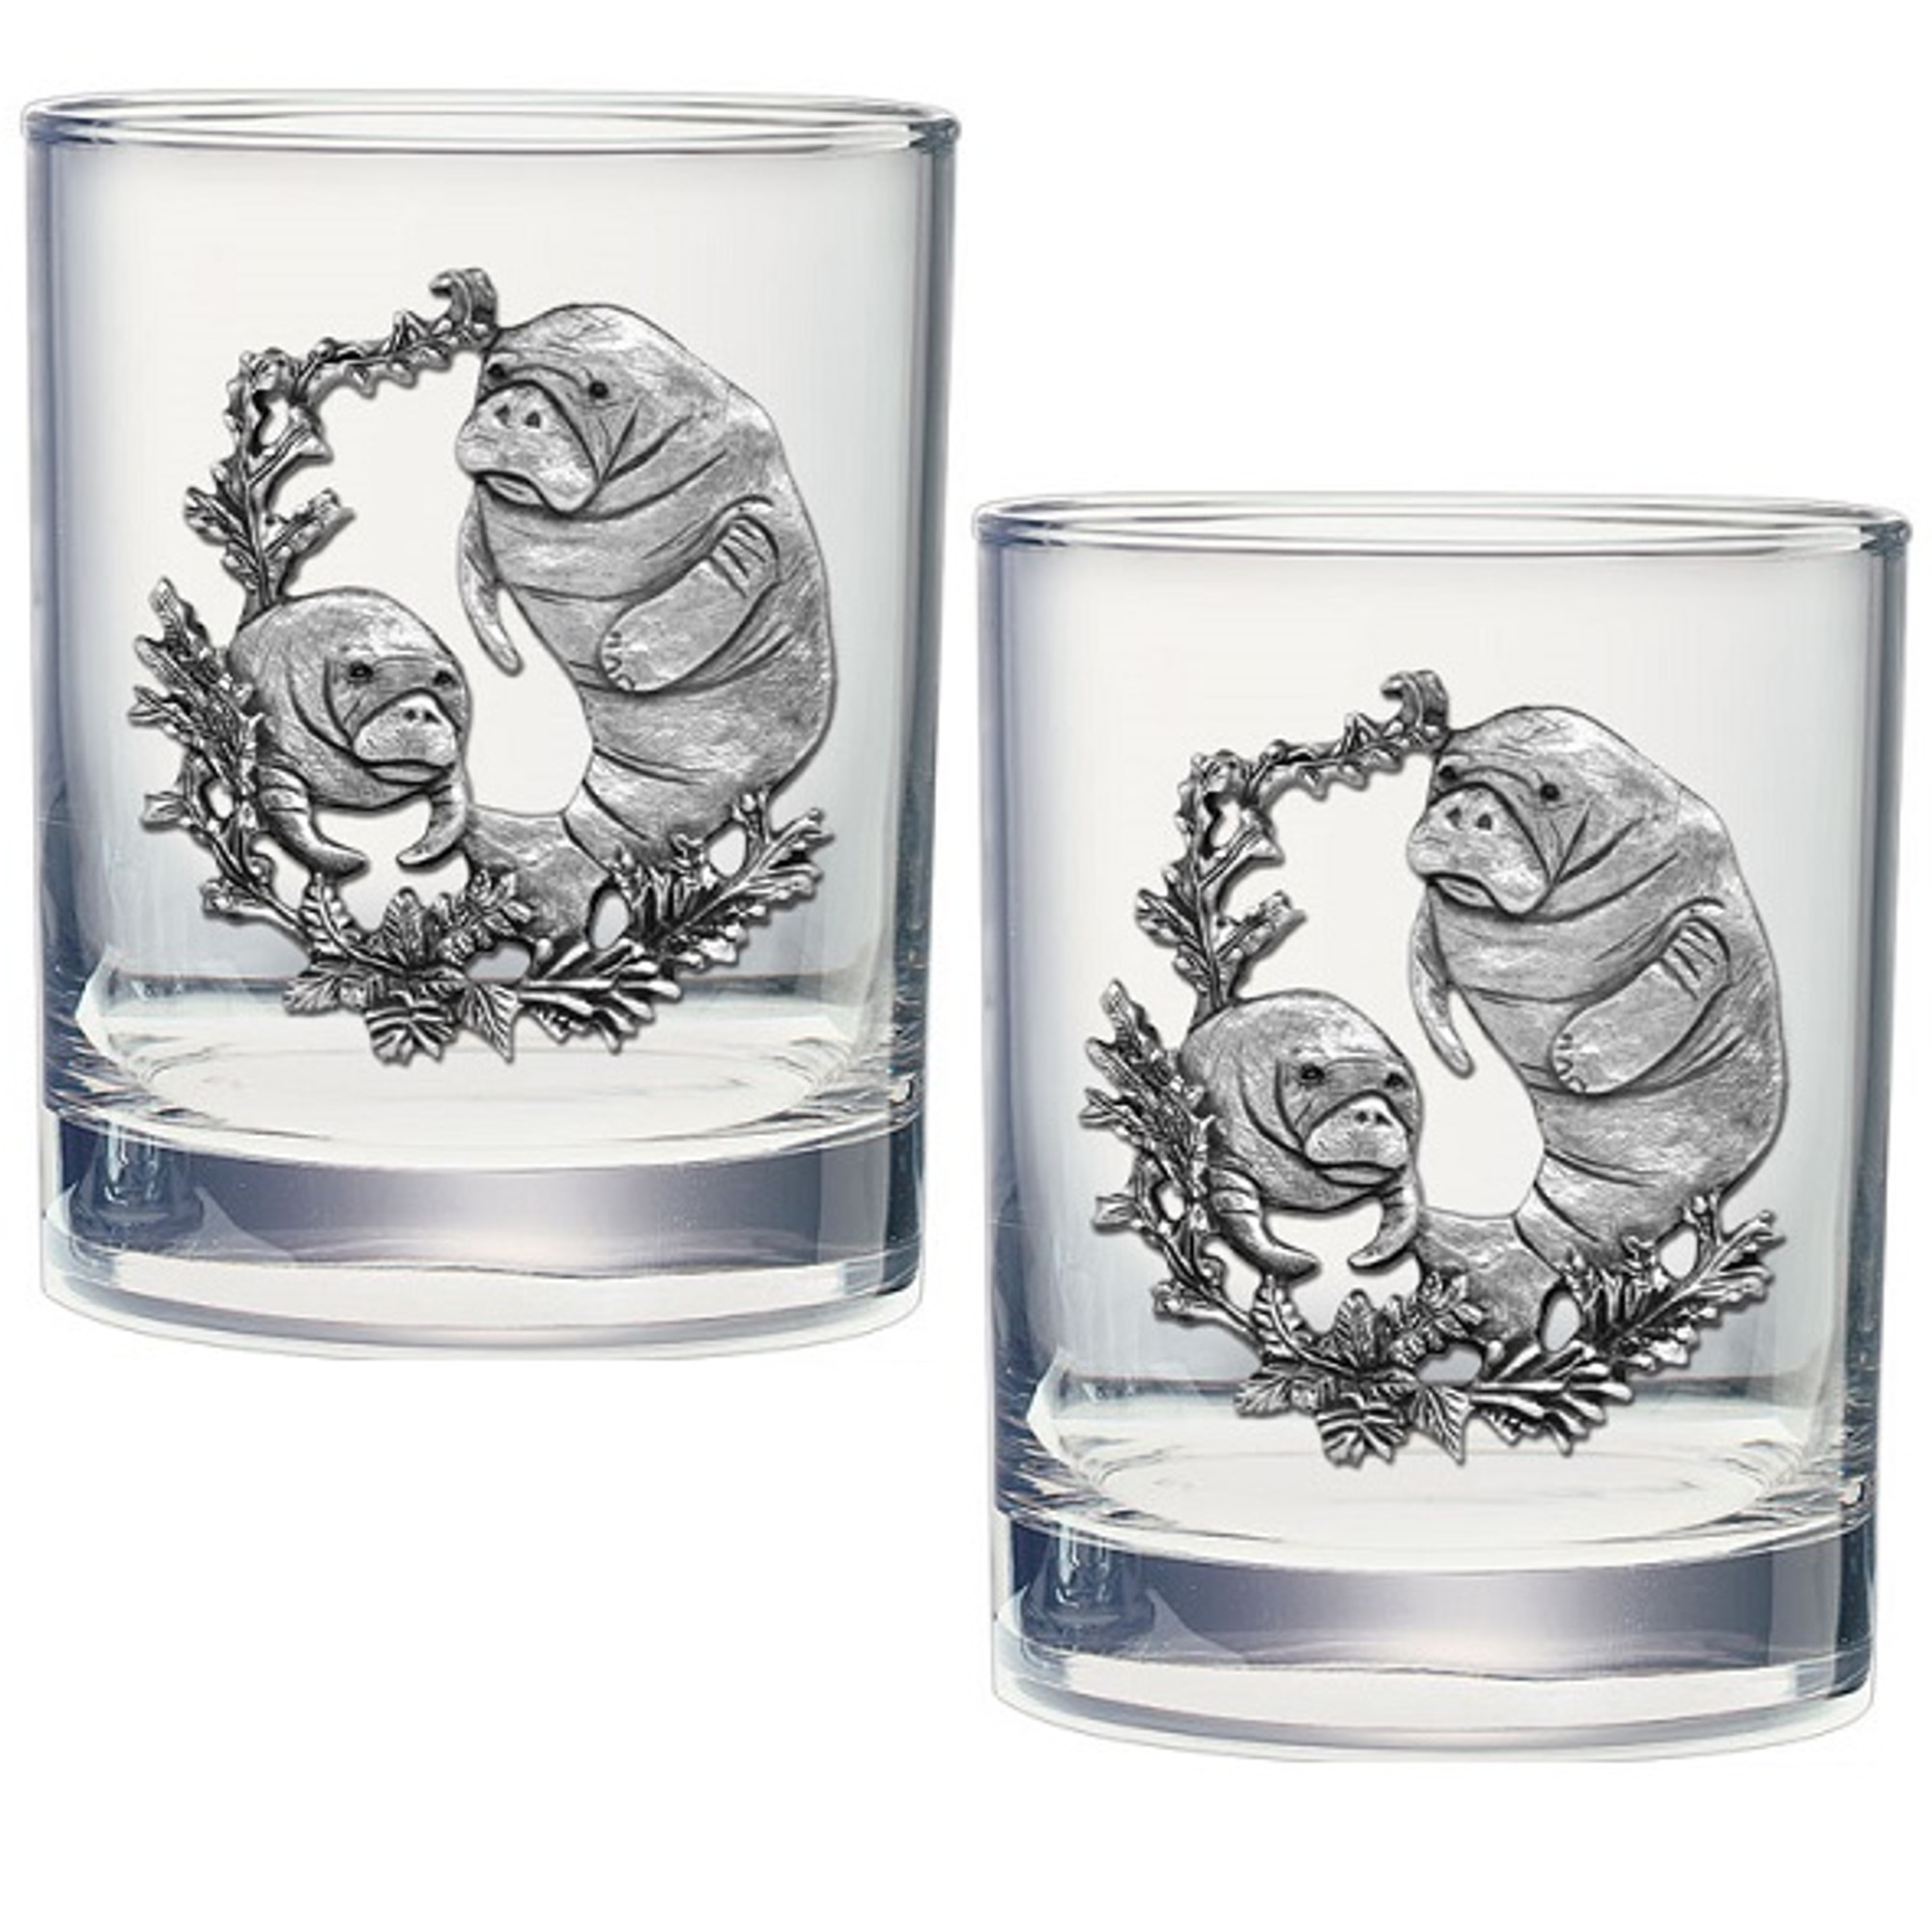 Heritage Metalworks DOF4110 Manatee Double Old Fashioned Glass, As Shown